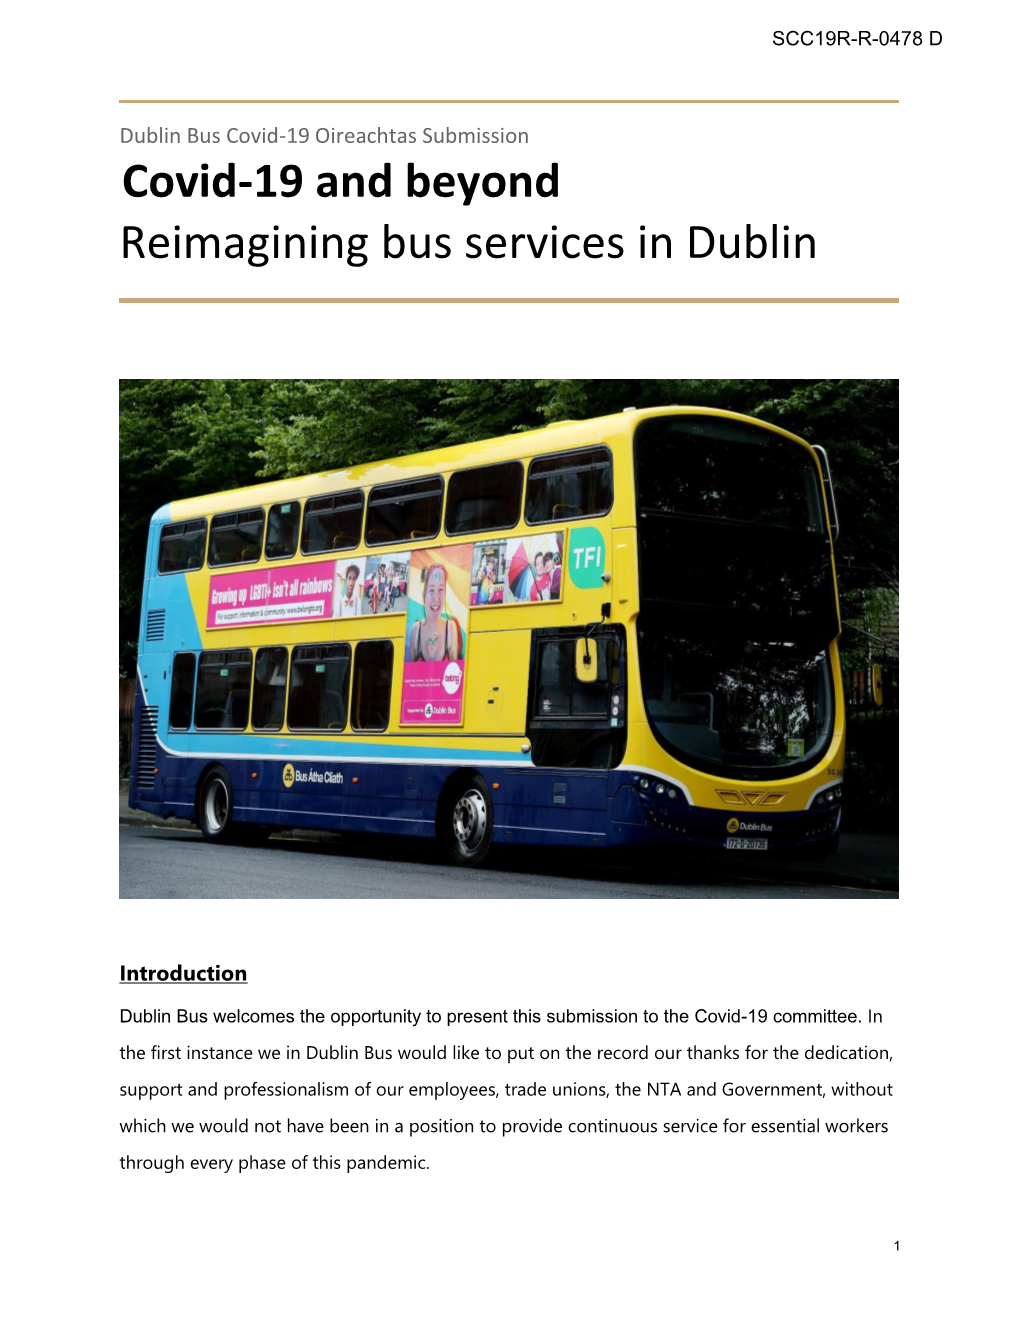 Covid-19 and Beyond Reimagining Bus Services in Dublin